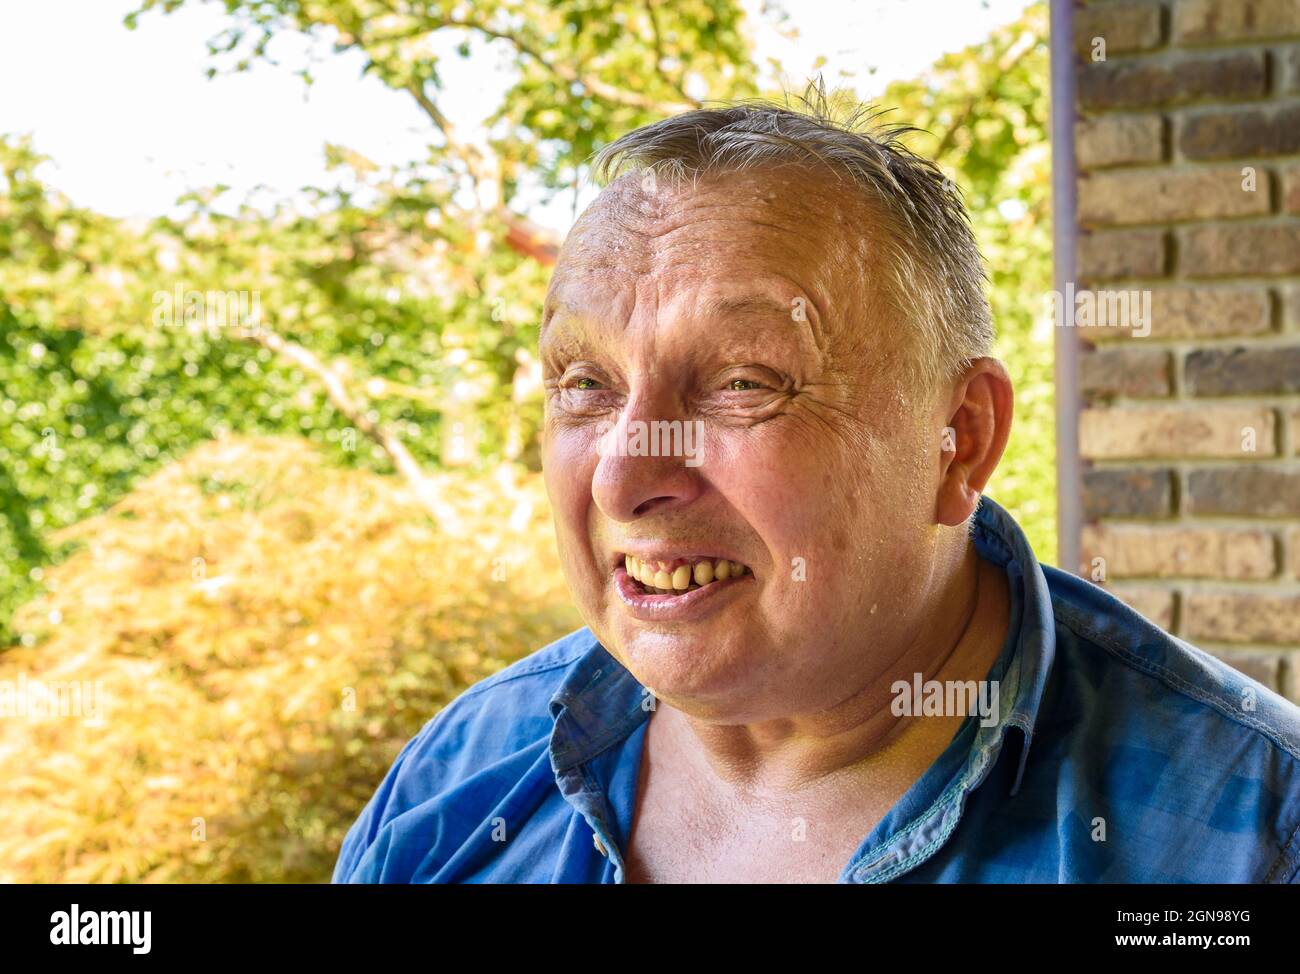 Portrait of tired mature man with grimace facial expression outside. Stock Photo